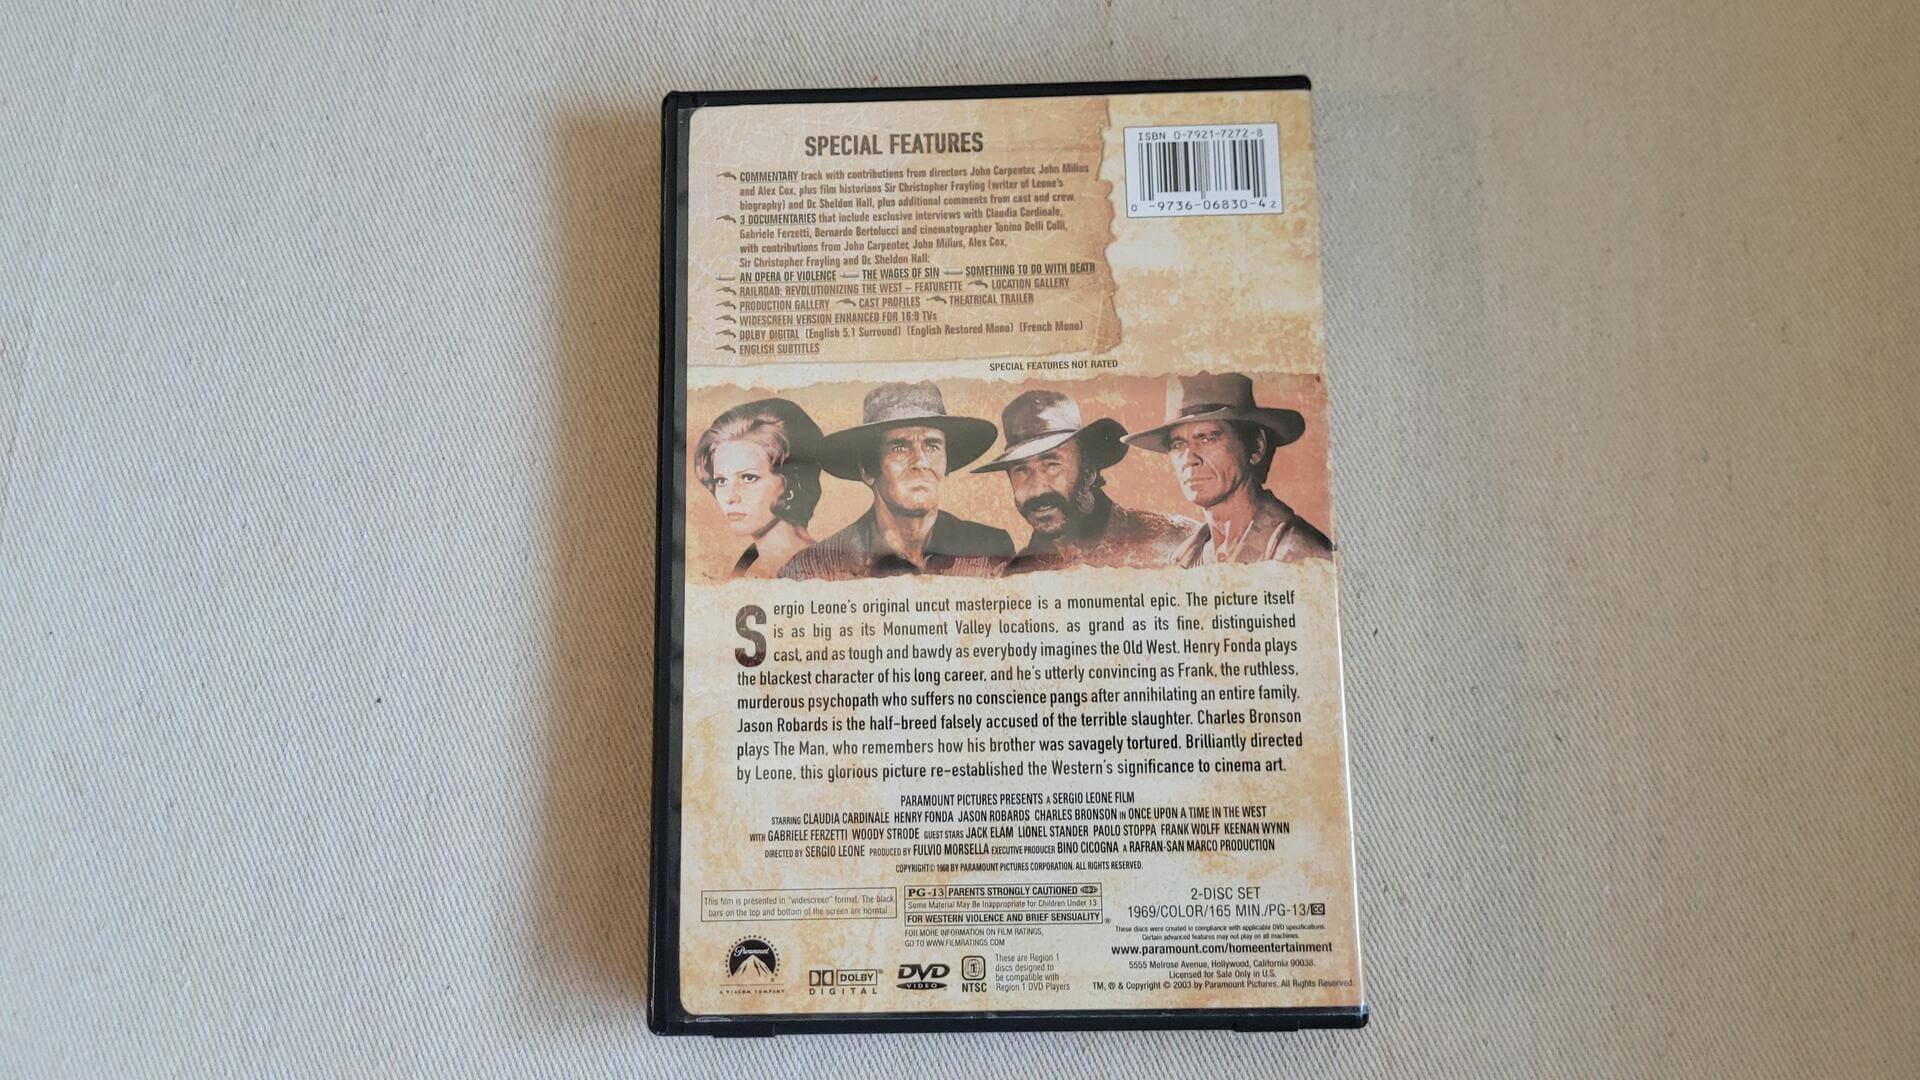 Once Upon a Time in the West, 1968 epic spaghetti western movie directed by Sergio Leone. Special collector's edition DVD 2 disc set